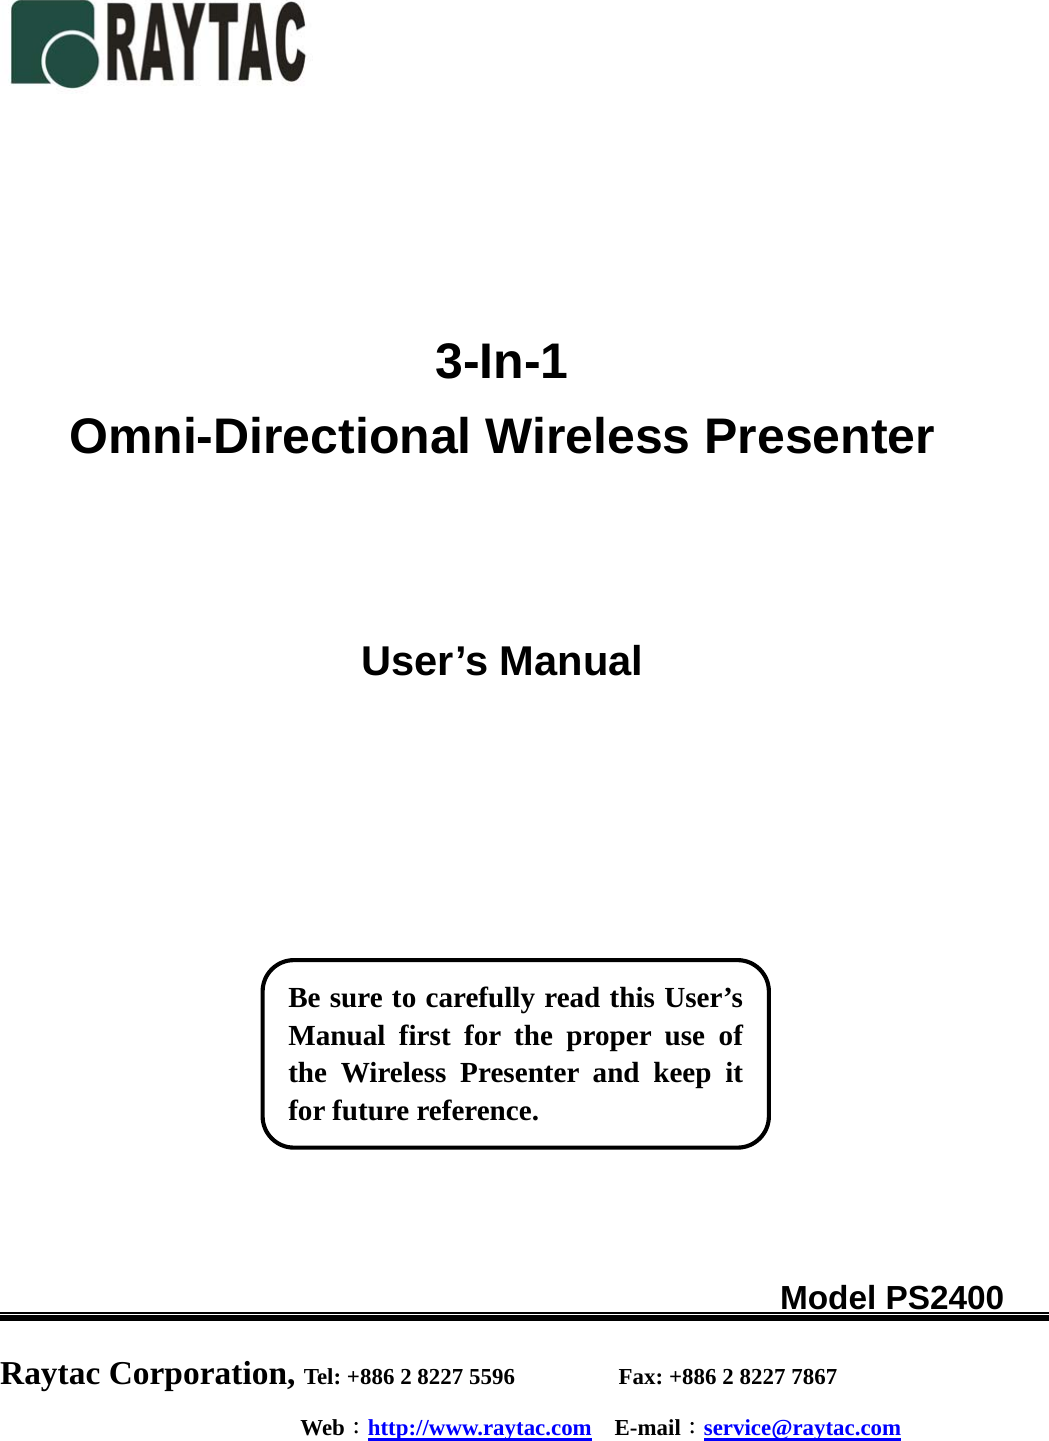     3-In-1 Omni-Directional Wireless Presenter    User’s Manual                                                Model PS2400        Raytac Corporation, Tel: +886 2 8227 5596         Fax: +886 2 8227 7867 Web：http://www.raytac.com  E-mail：service@raytac.com    Be sure to carefully read this User’sManual first for the proper use ofthe Wireless Presenter and keep itfor future reference. 